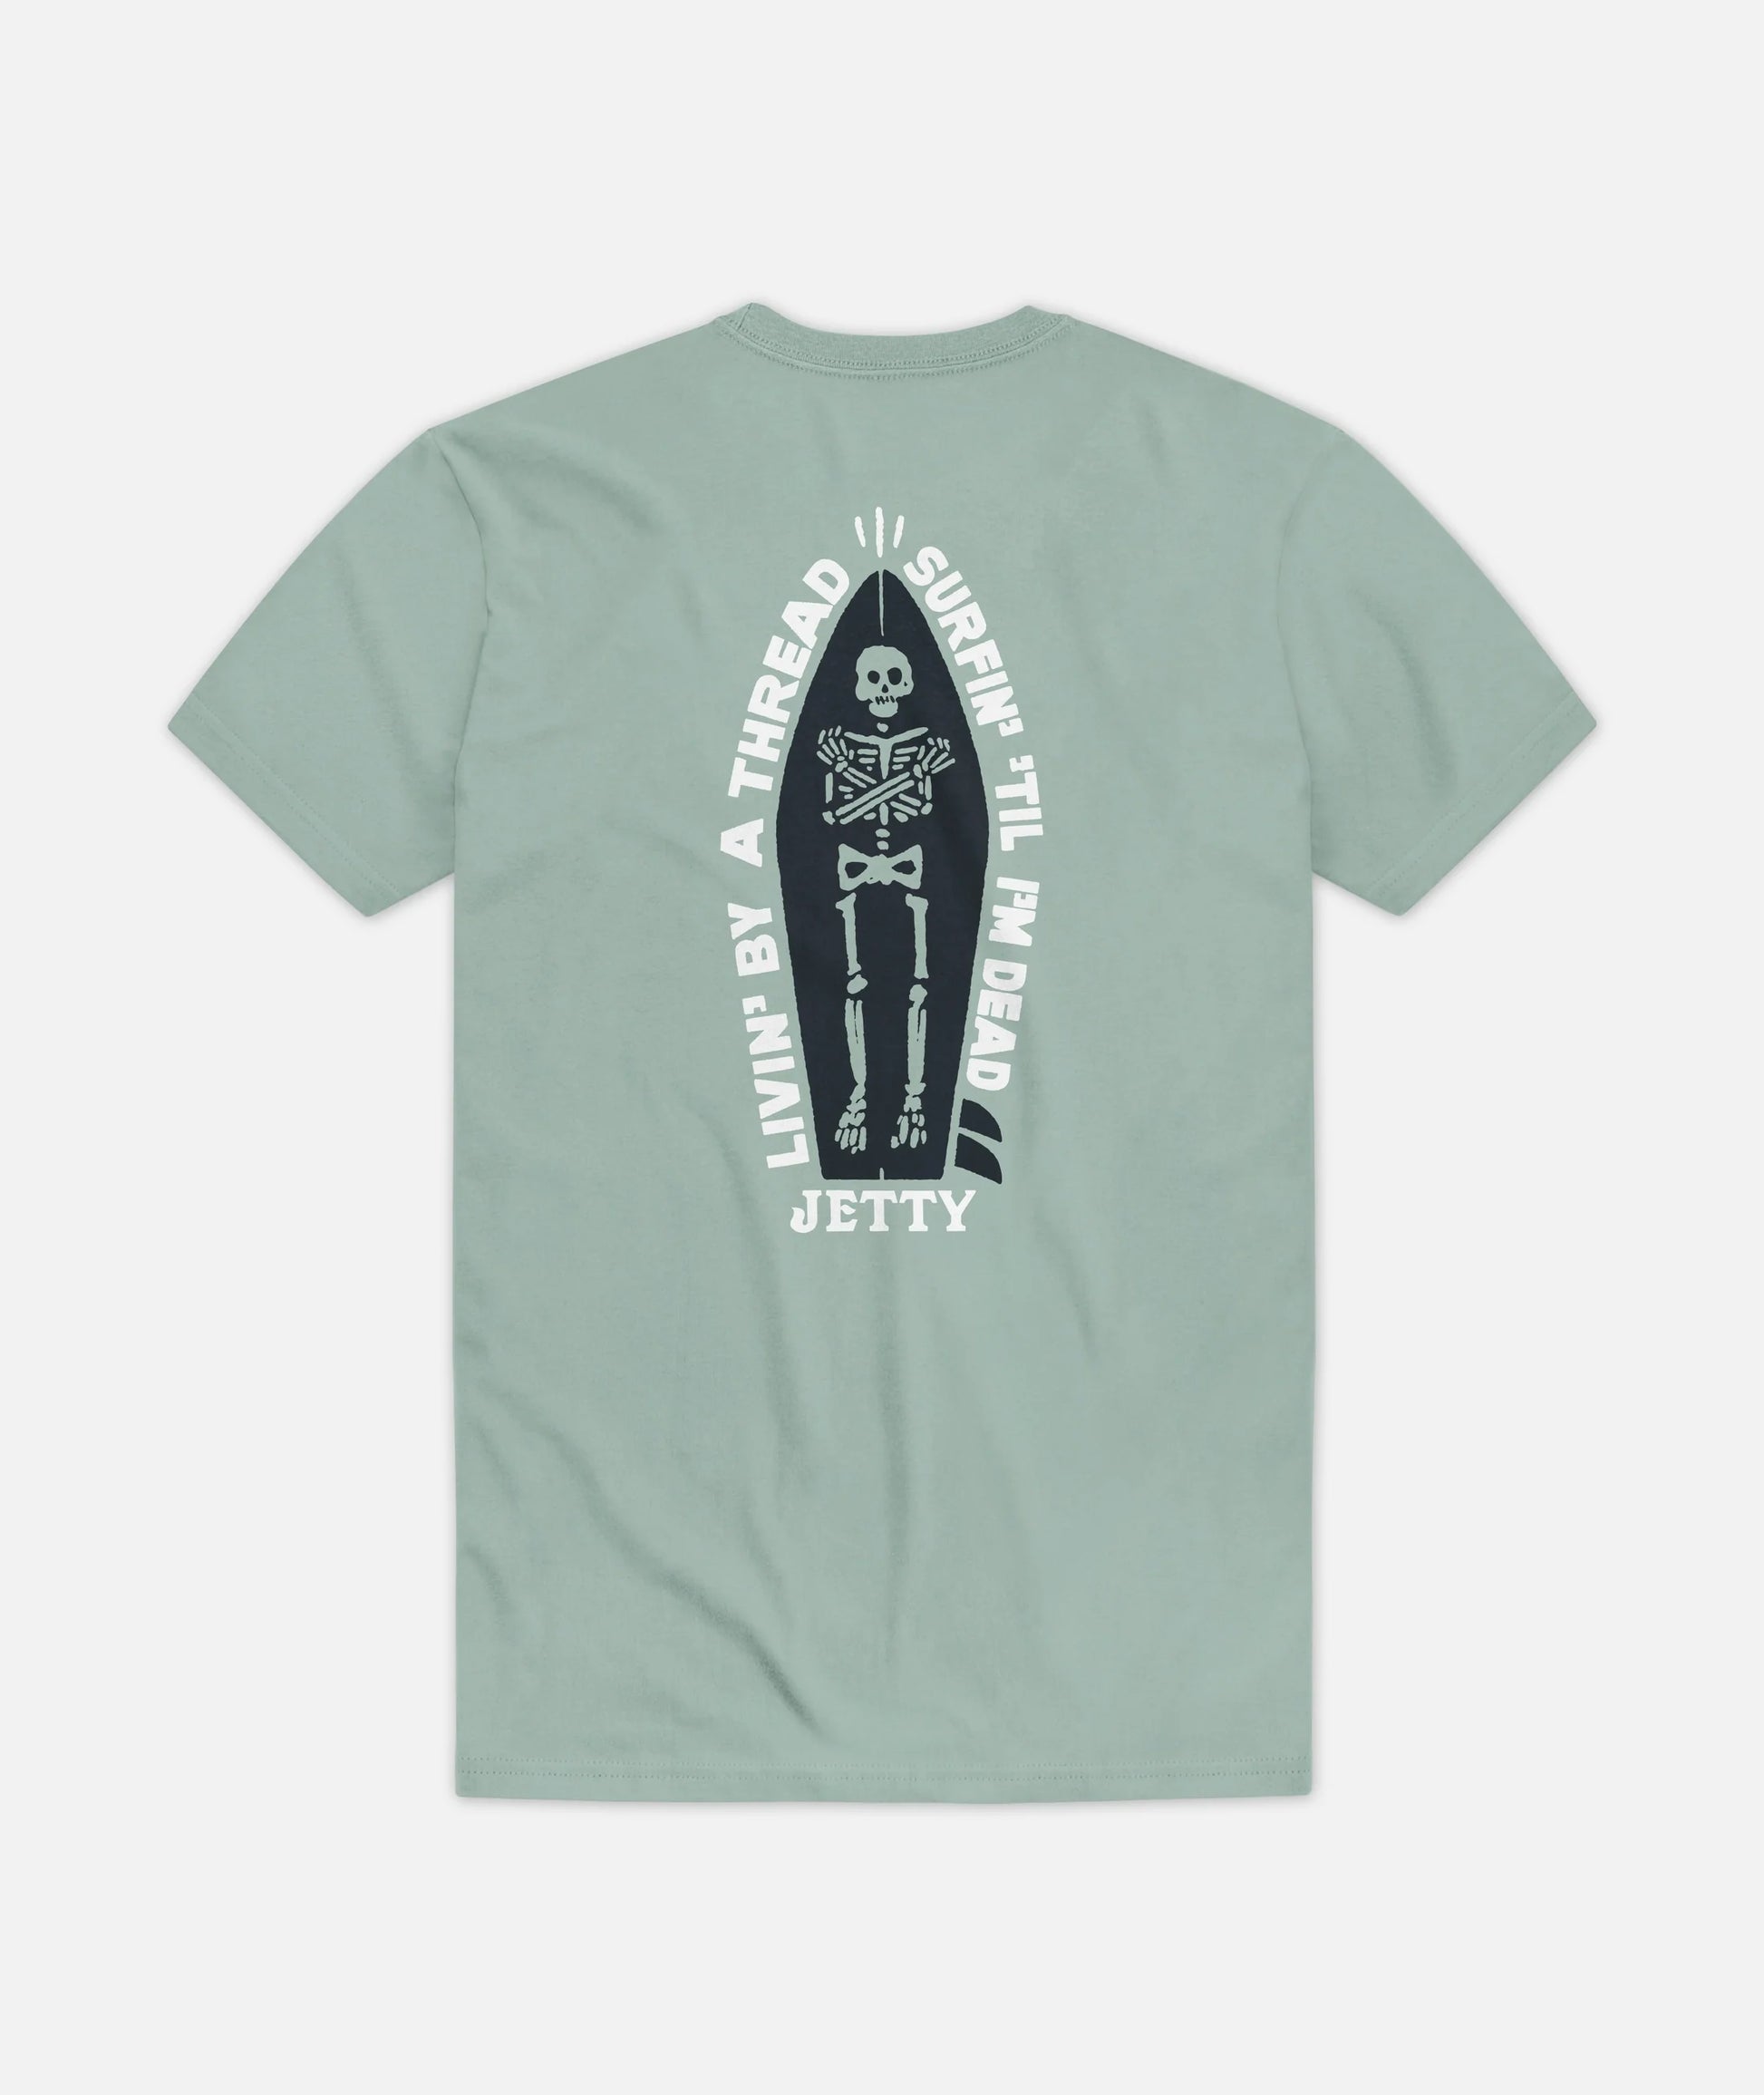 Coffin Tee - Storm and Sky Shoppe - Jetty